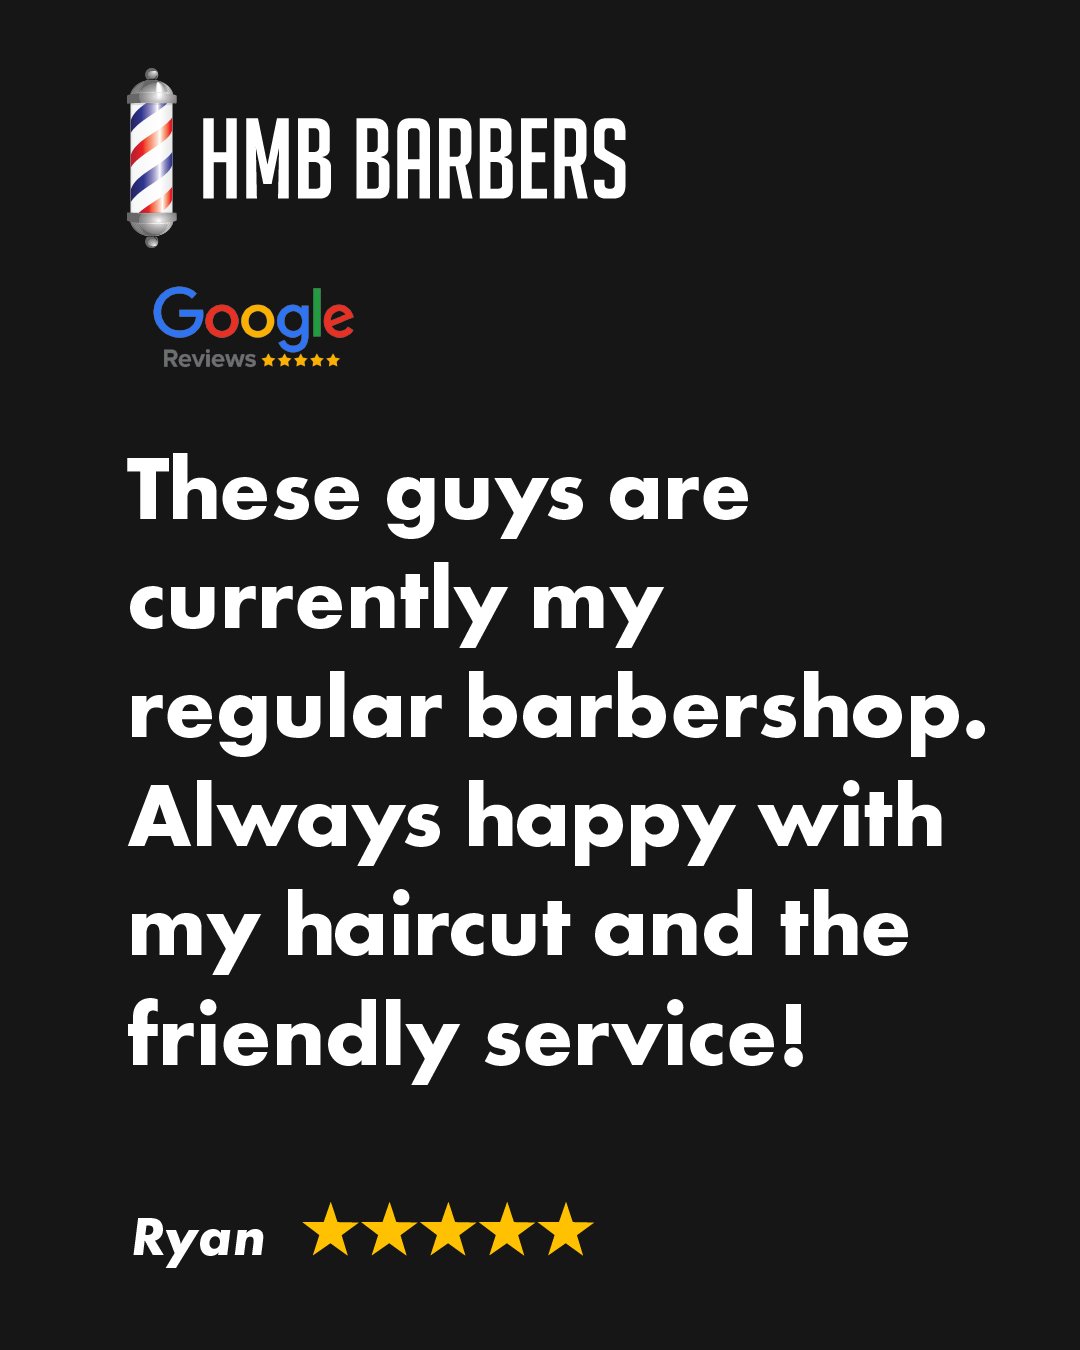 Take a look at some of our most recent glowing reviews from our customers in Townsville! ⭐️⭐️⭐️⭐️⭐️

#HMBBarbers #BarberLife #BarberShop #BarberLove #Barbering #QueenslandBarber #QLDBarber #BrisbaneBarber #SunshineCoastBarber #Haircut #MensHair #Fade